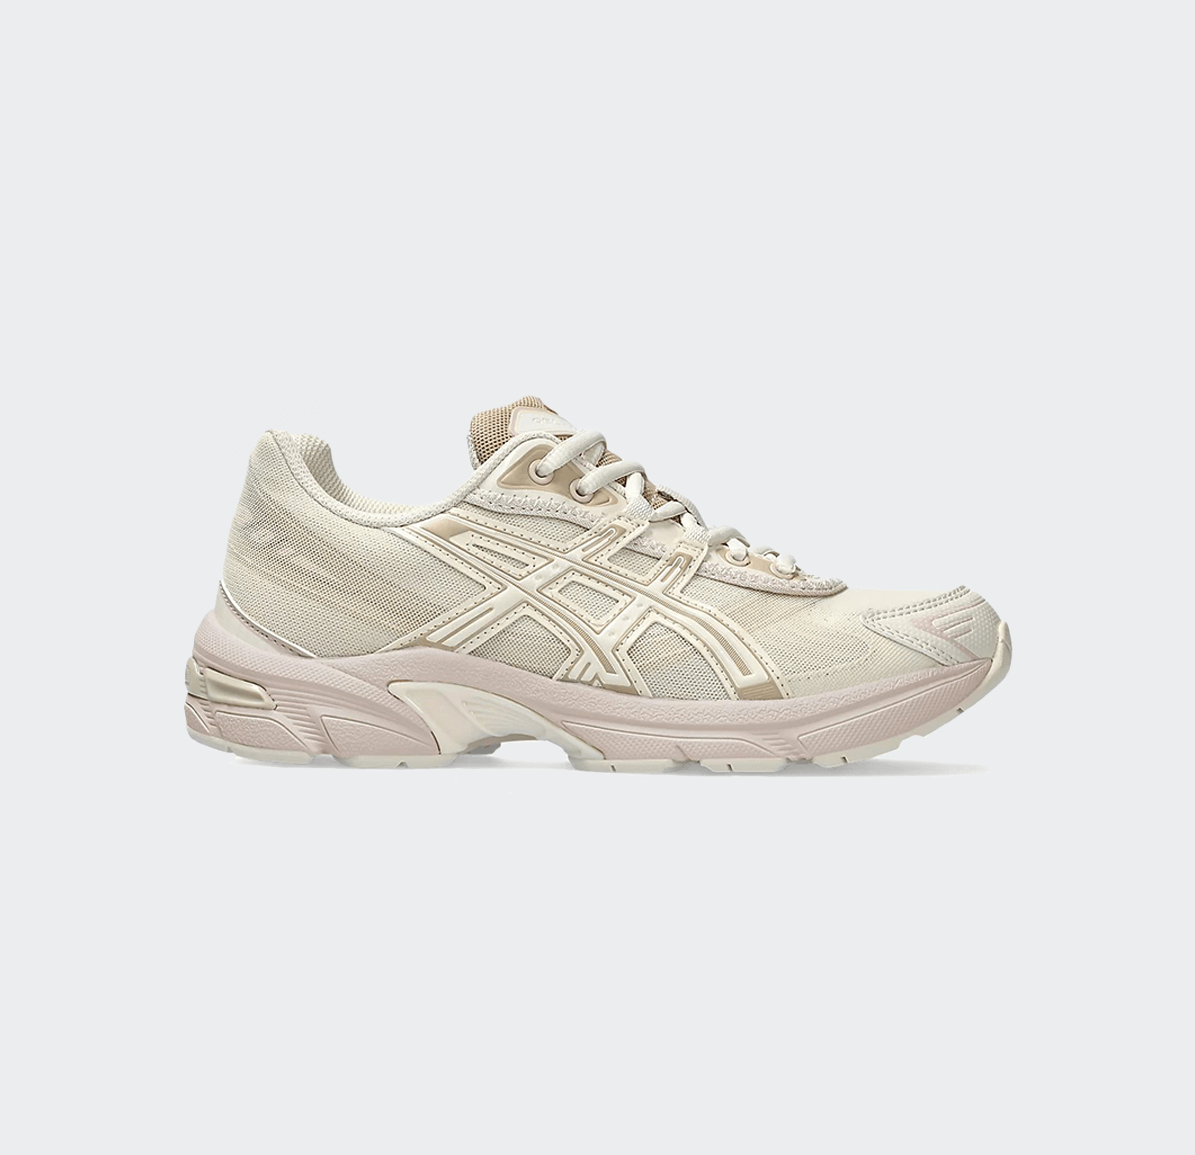 Asics SportStyle Gel-1130 RE Womens - Oatmeal/Oatmeal - Asics SportStyle - State Of Play